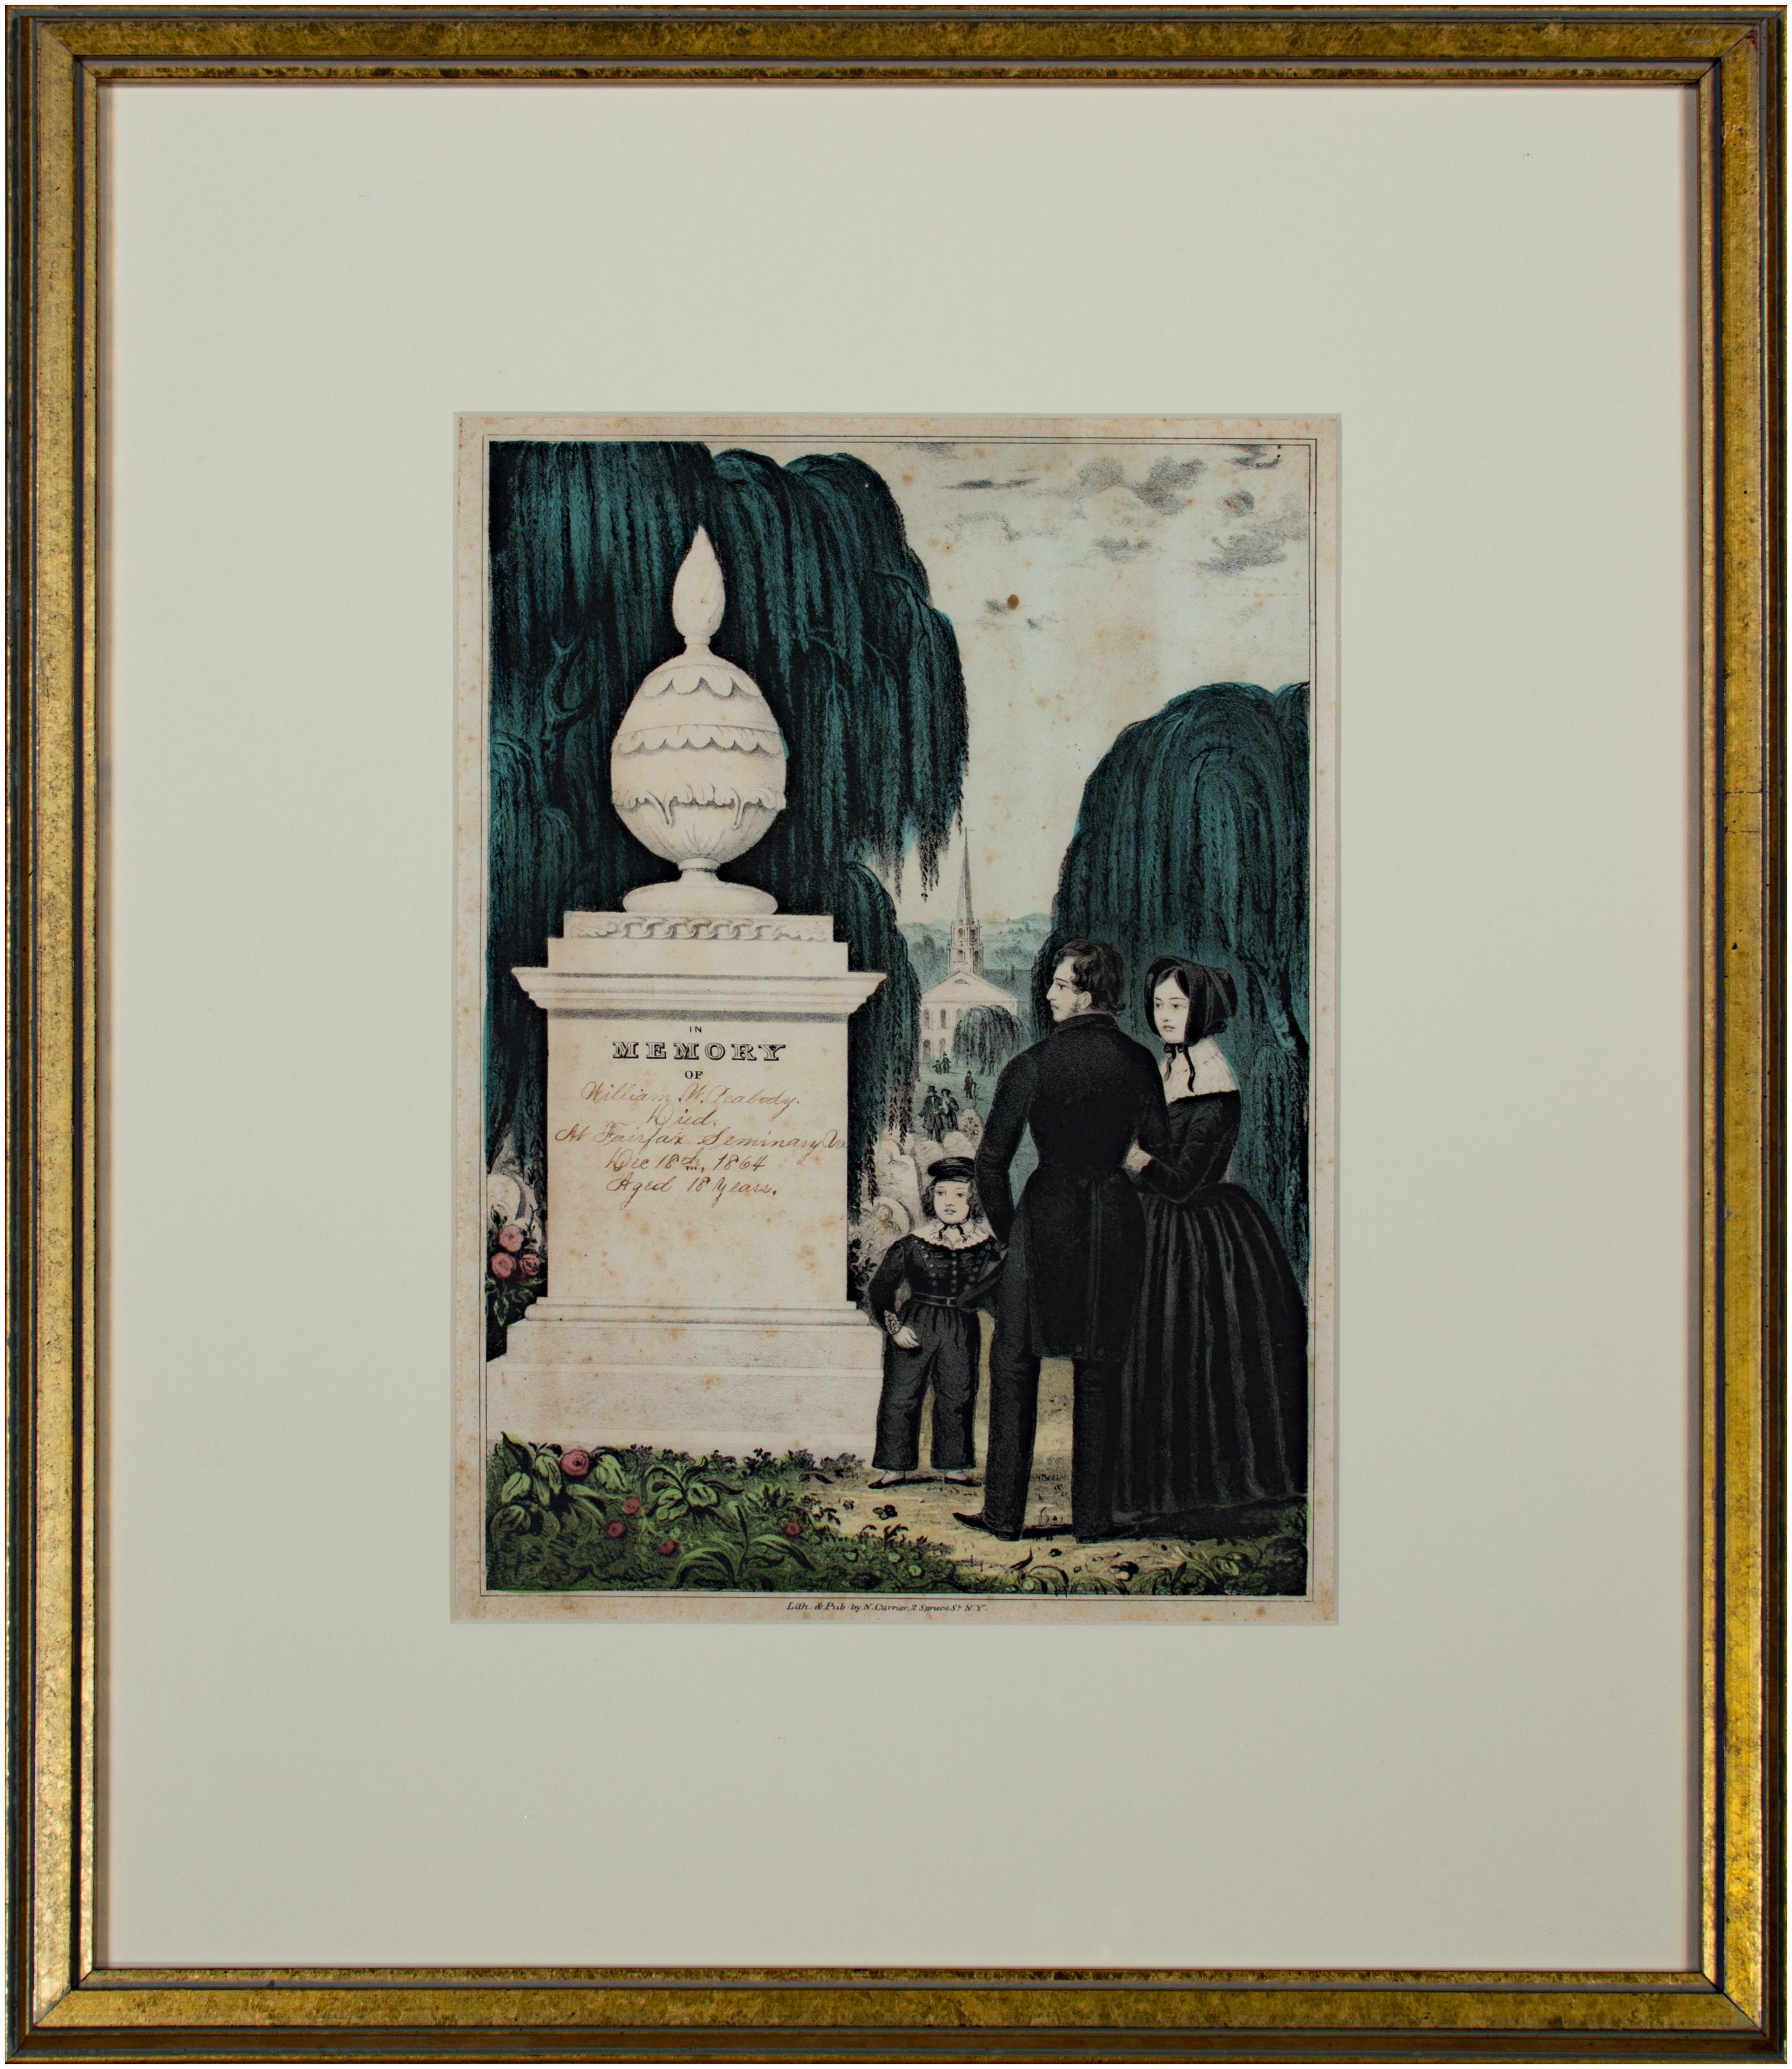 'In Memory of William W. Peabody' original hand-colored lithograph by N. Currier - Print by Nathaniel Currier